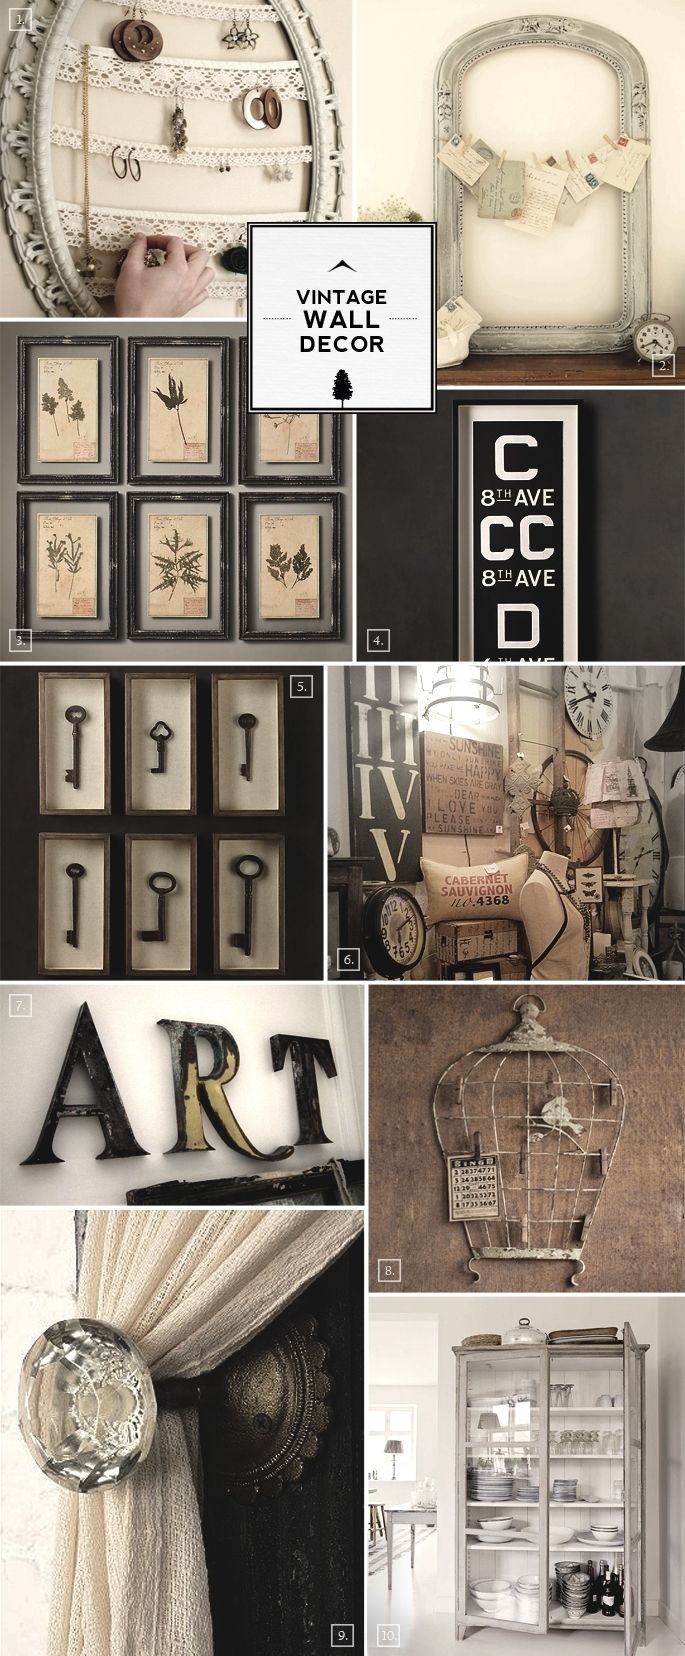 Vintage Wall Decor Ideas: From Bird Cages To Designing With Frames With Vintage Wall Art (View 13 of 20)